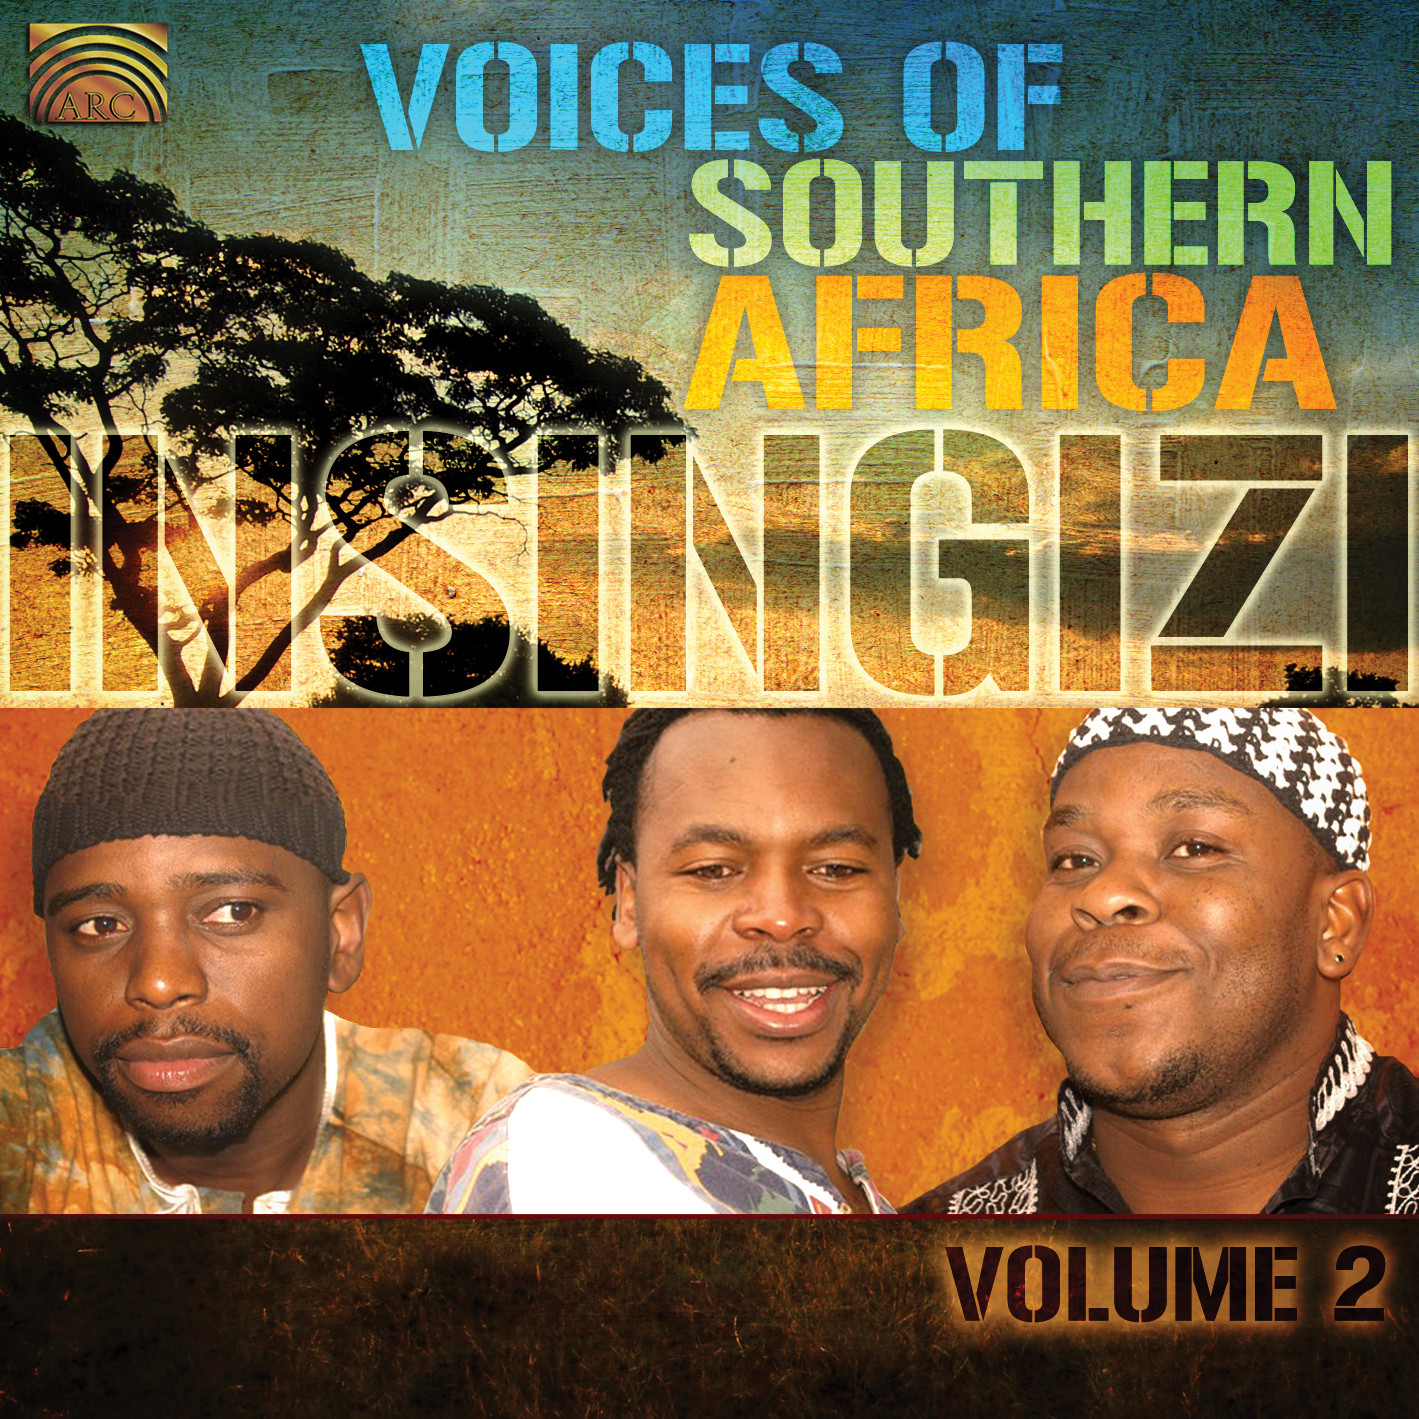 EUCD2243 Voices of Southern Africa, Vol. 2